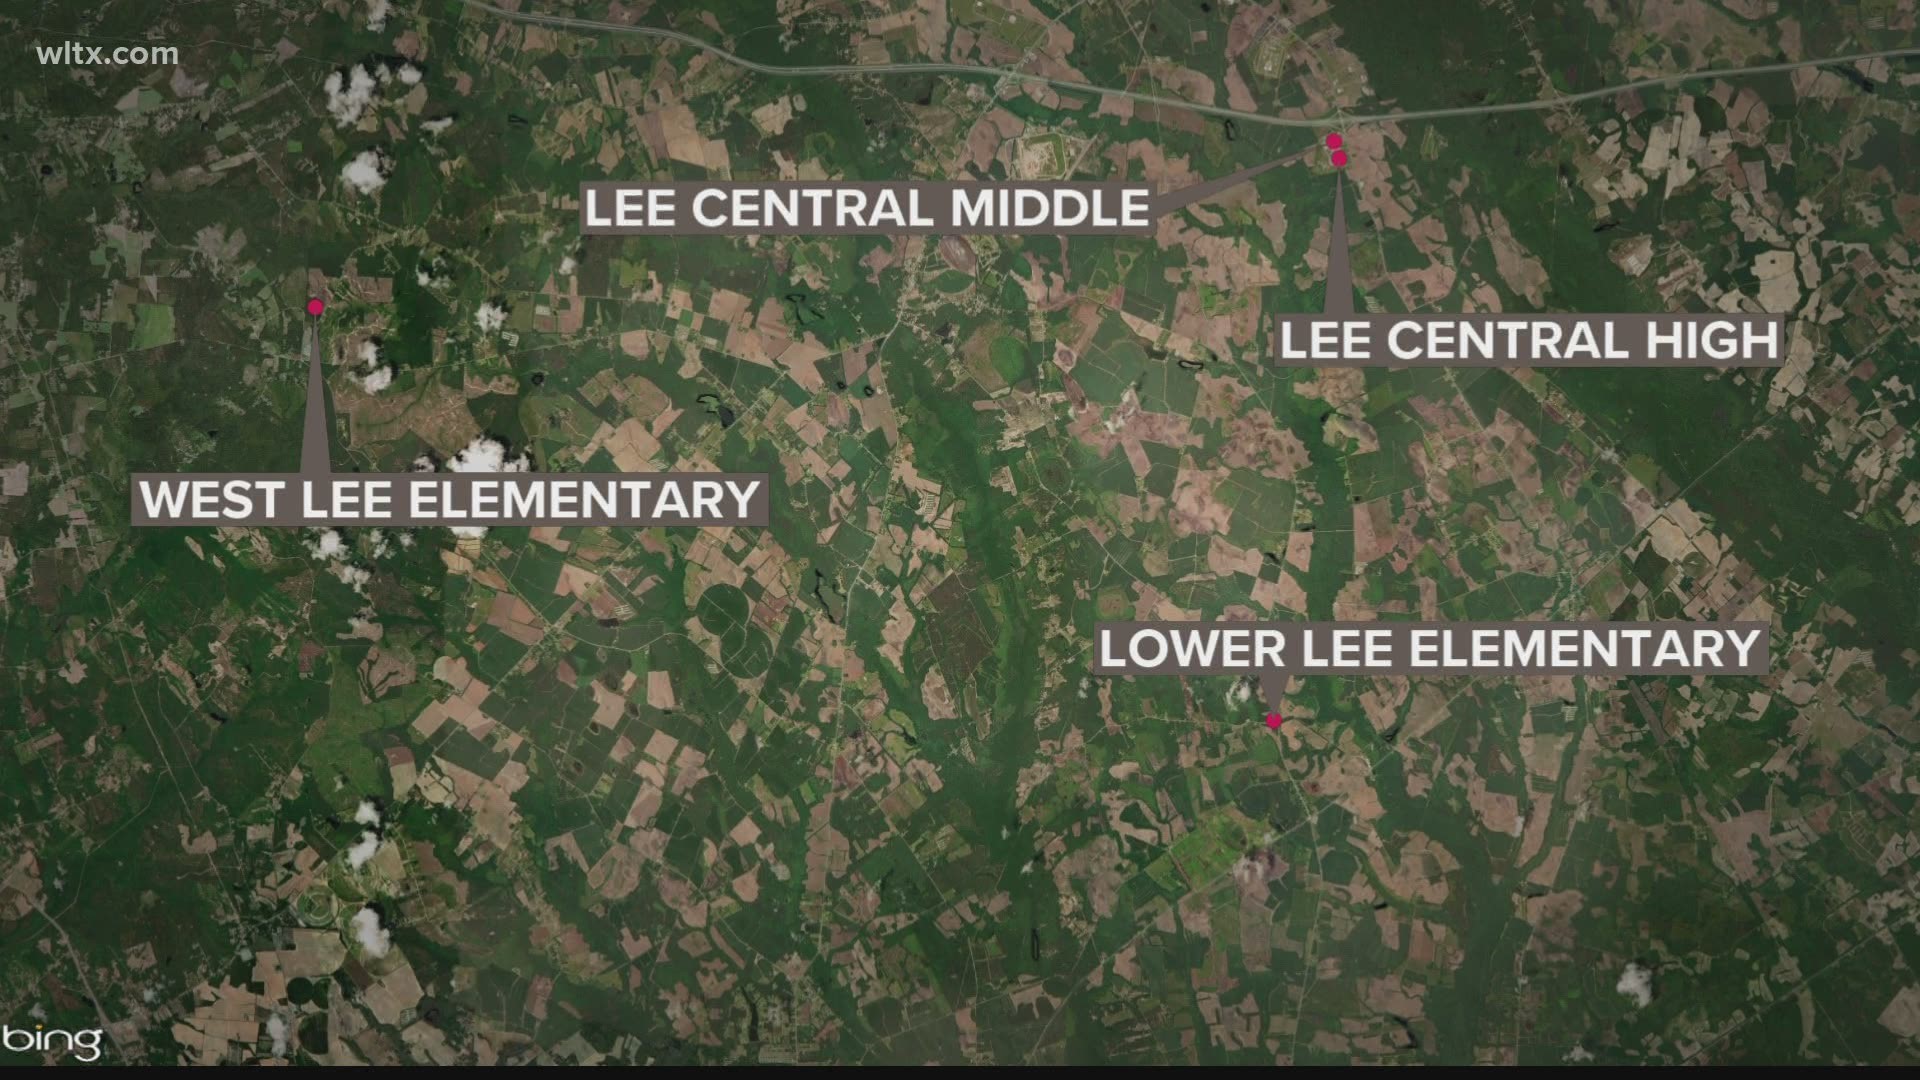 4 South Carolina schools to have Robert E. Lee's name removed 